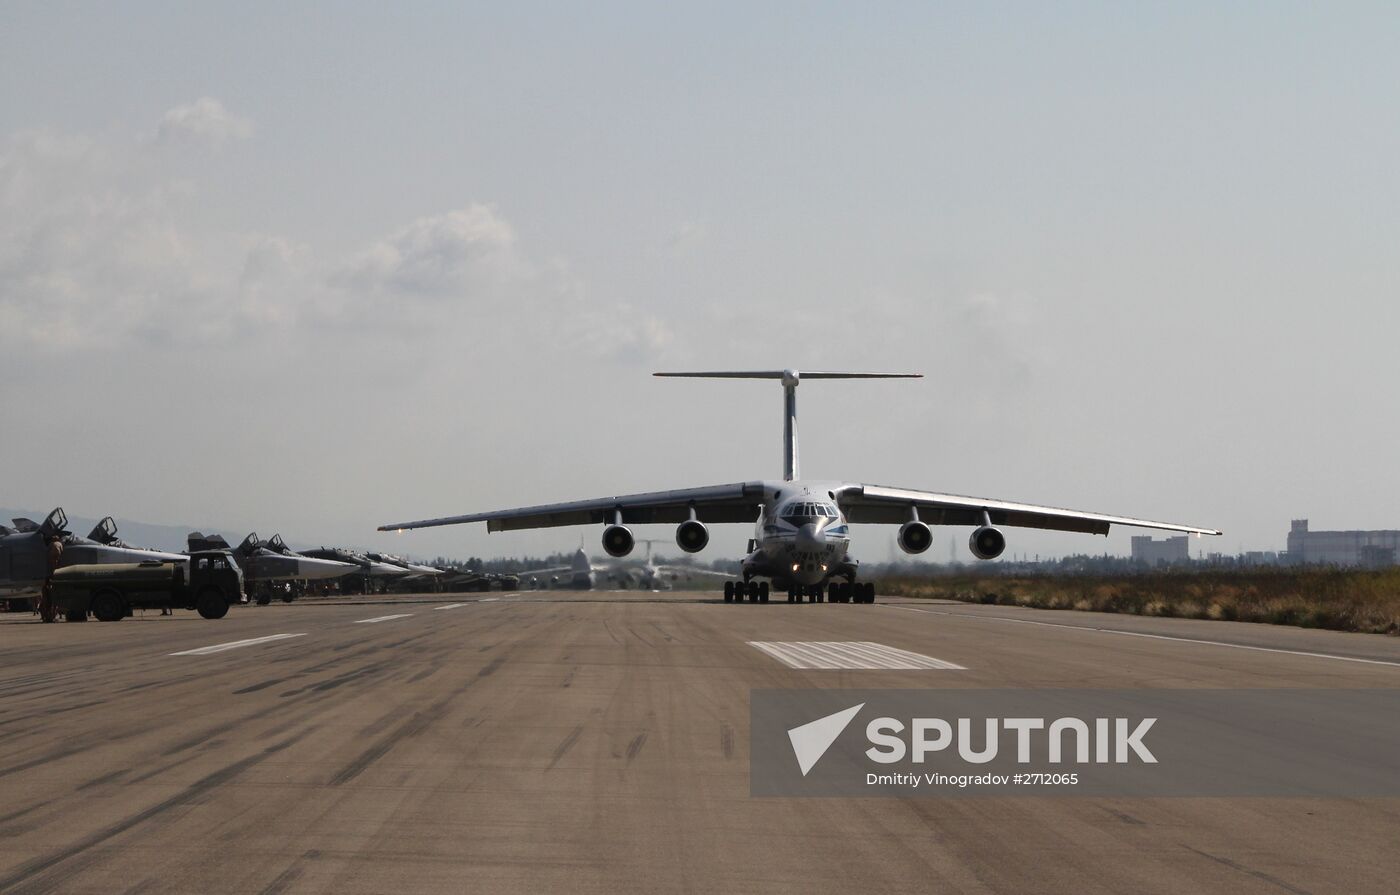 Russian military air group at Khmeimim airbase in Syria